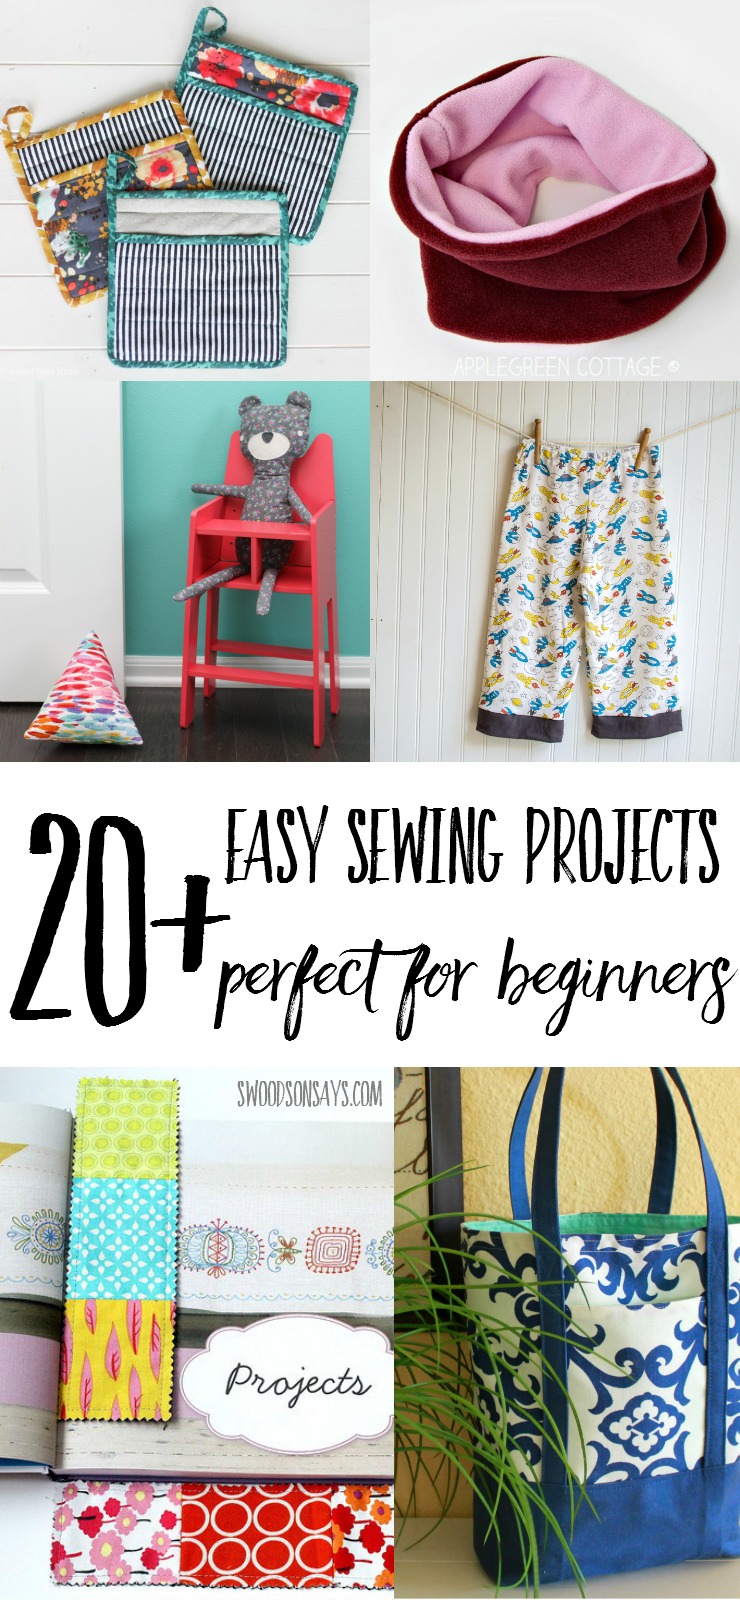 A big list of beginner sewing projects that are fun and easy to make! Simple sewing tutorials with pictures to help along the way, there is a beginner sewing project for everyone on this list!